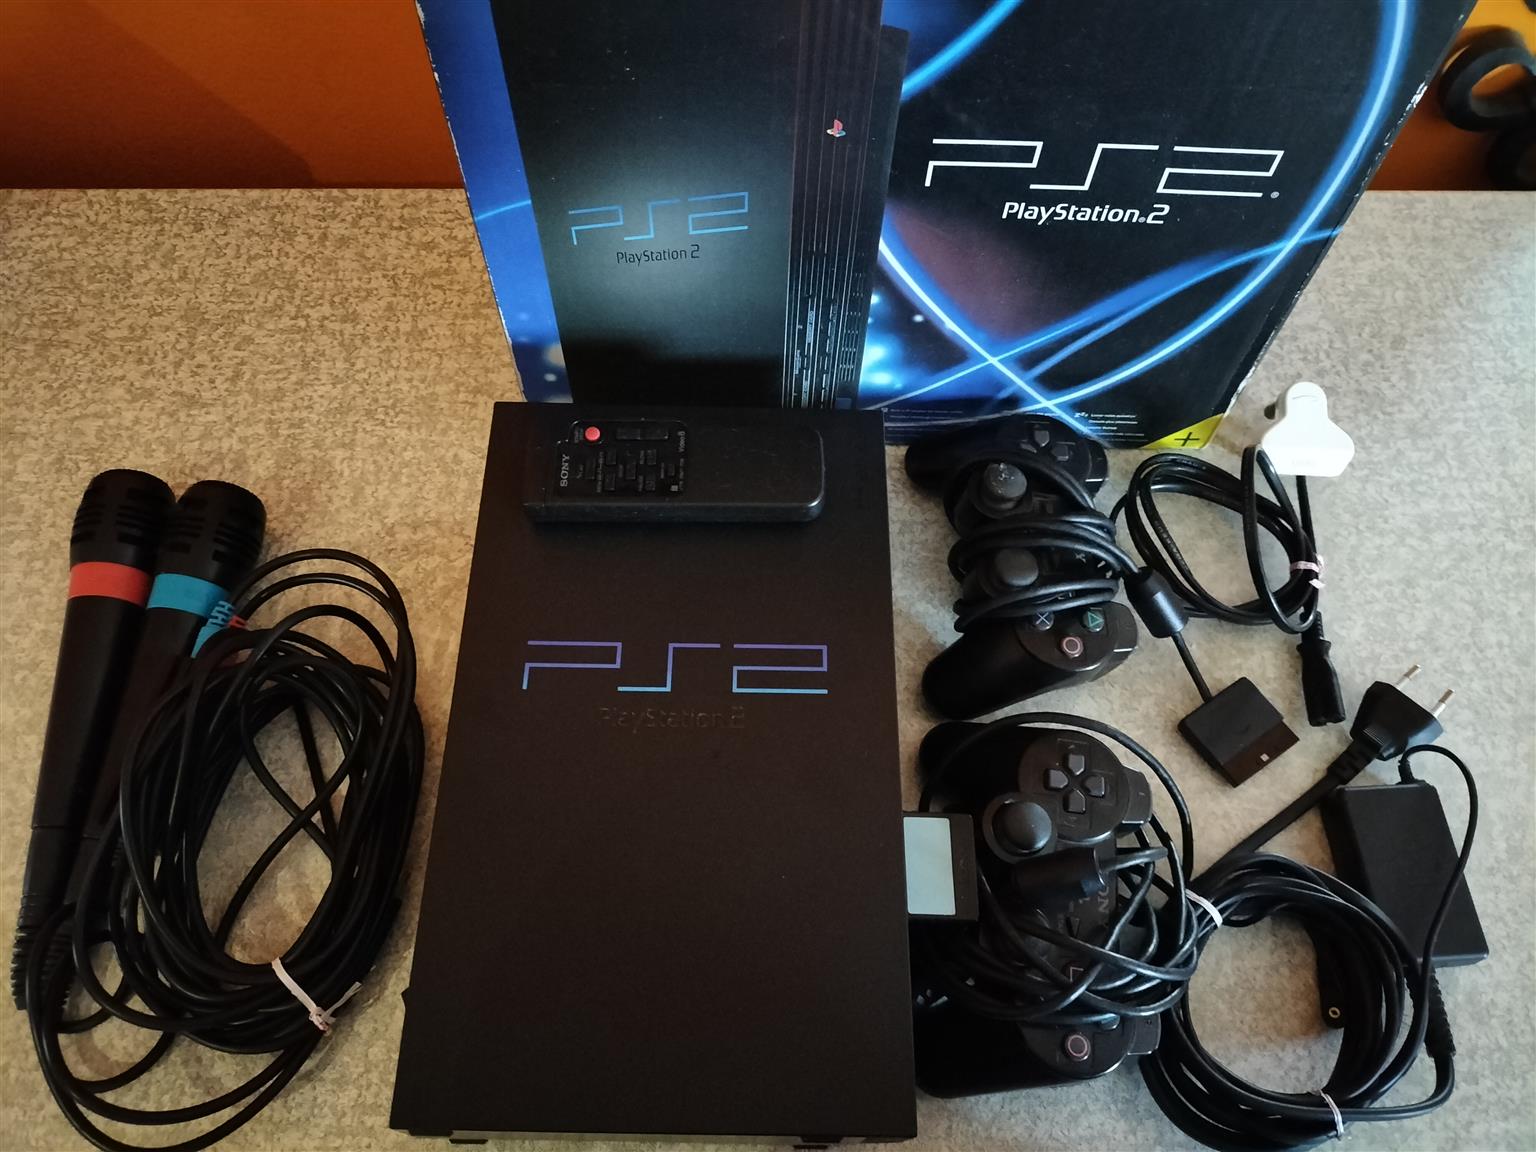 Sony Play Station 2 complete Gaming